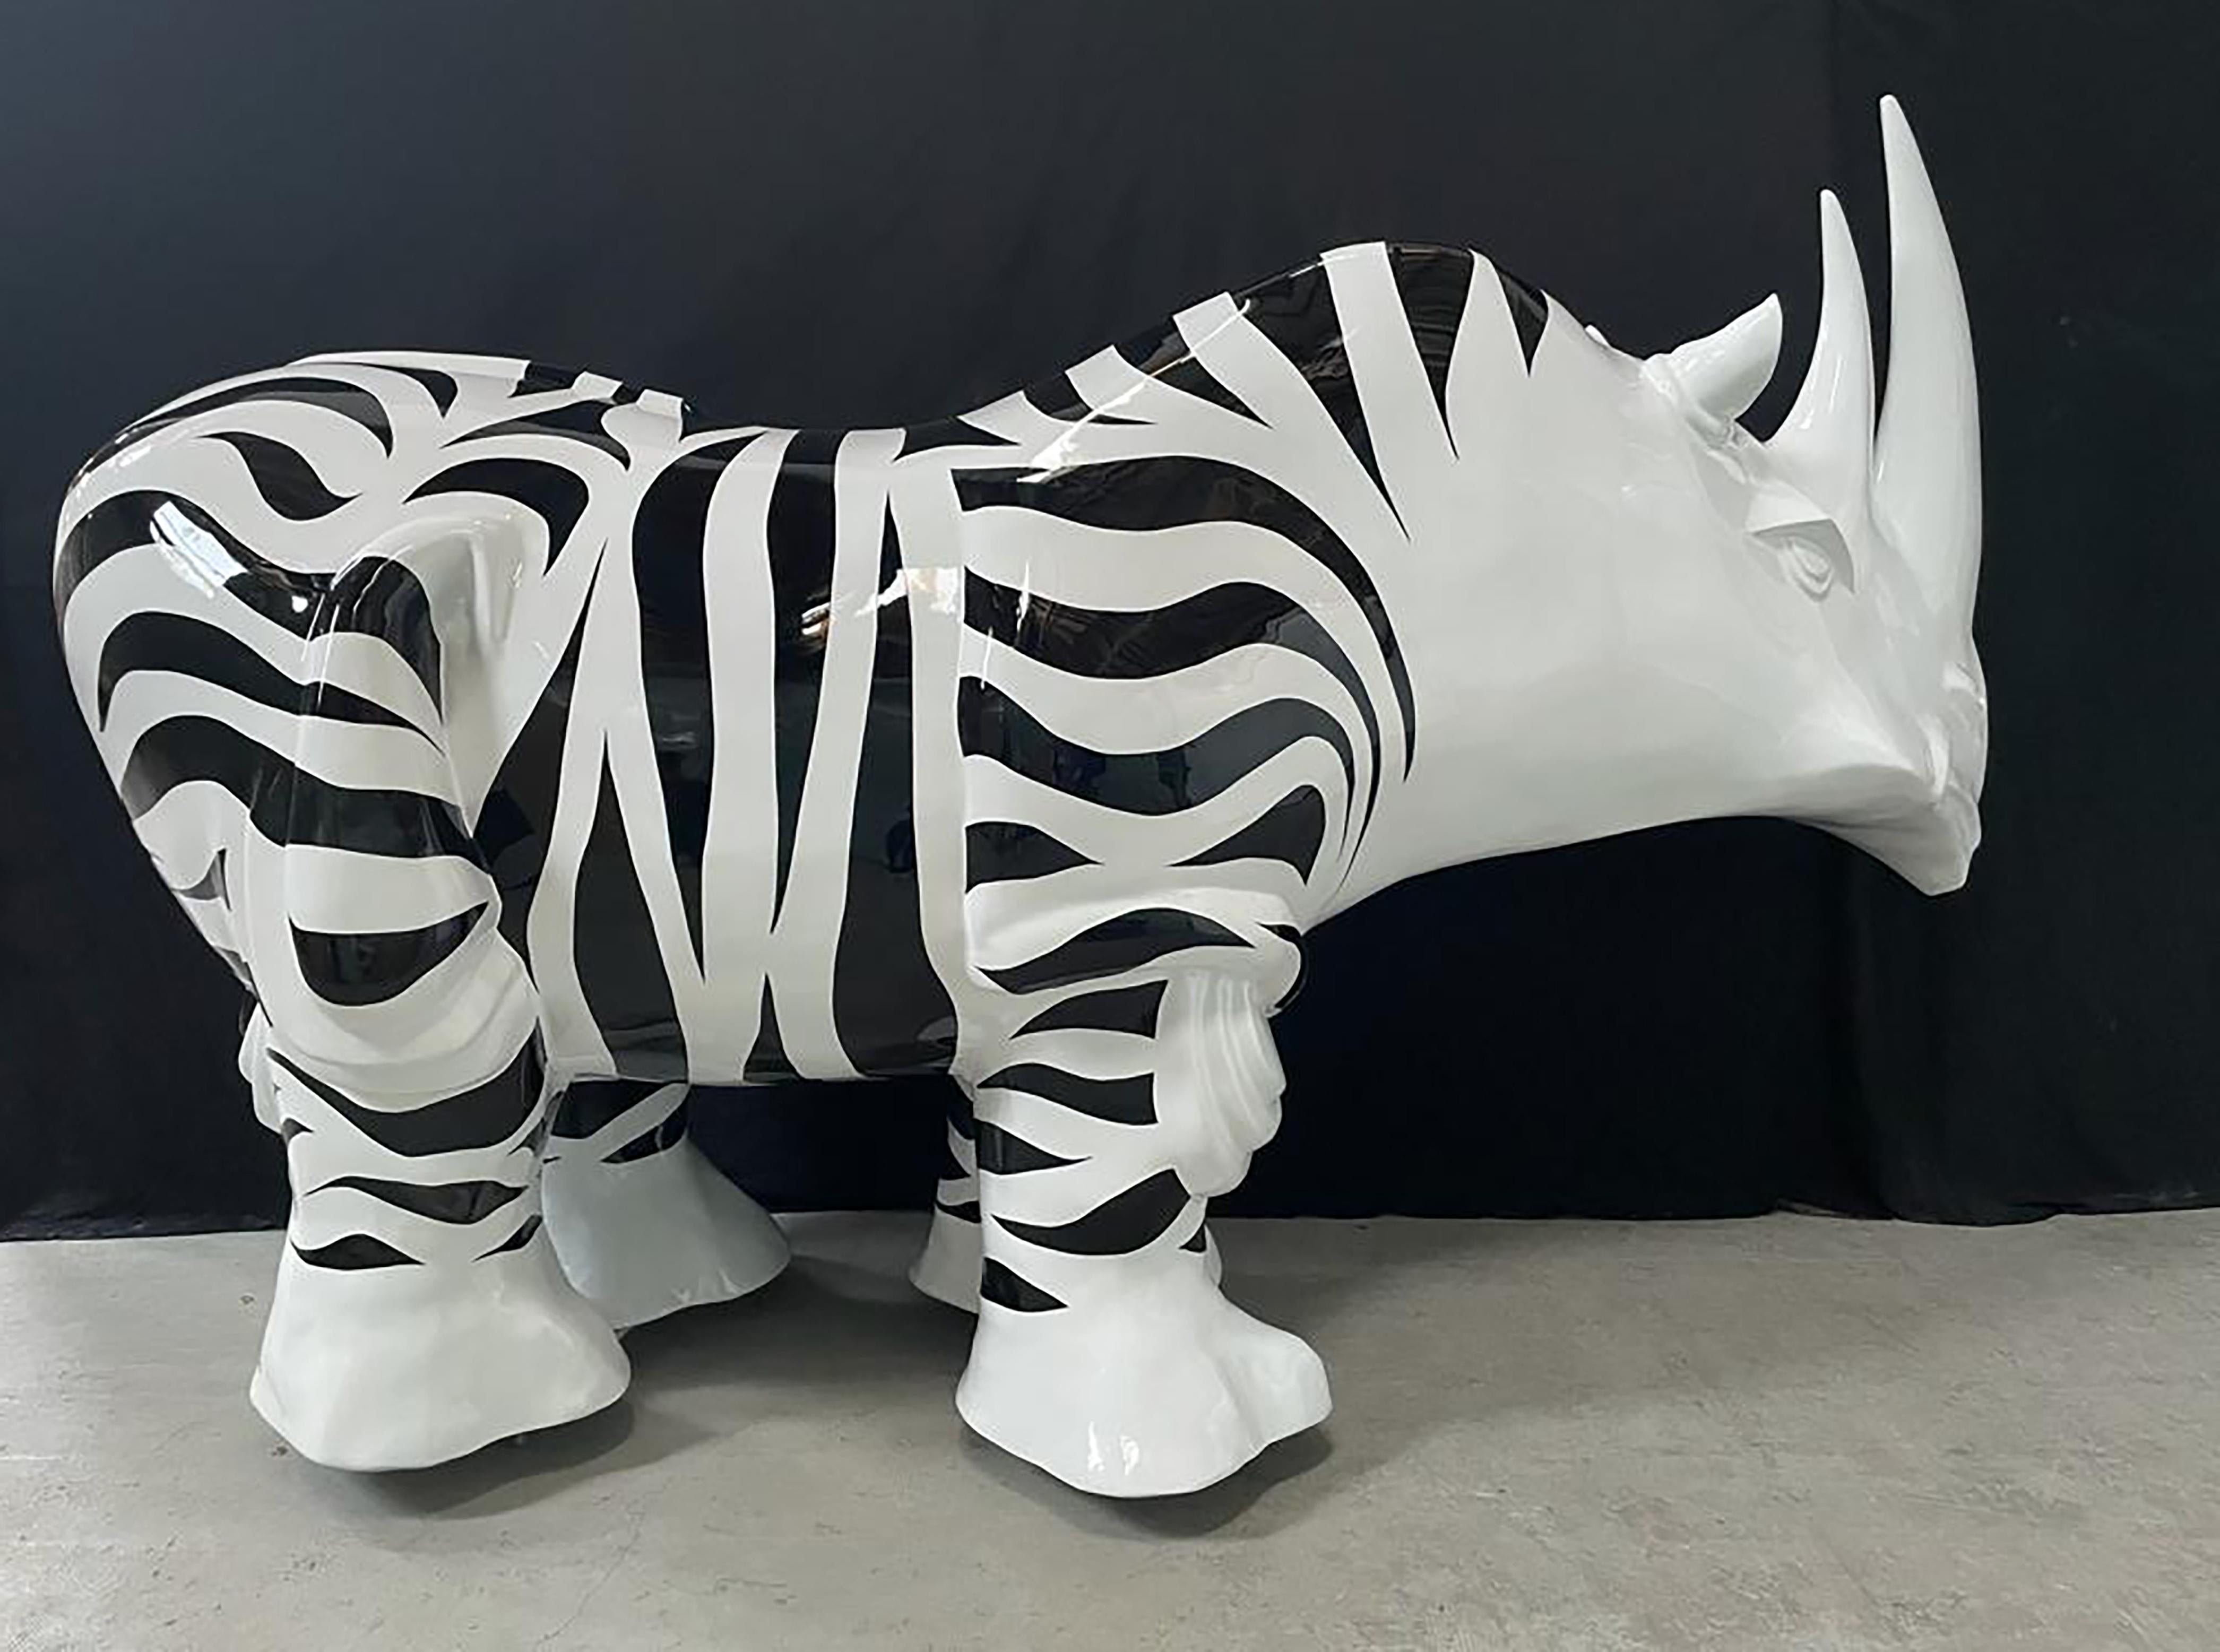 Rhinozebros is a resin sculpture made by Patrick Schumacher, a French contemporary artist. This sculpture represents a rhinoceros adorned with a zebra skin. 
